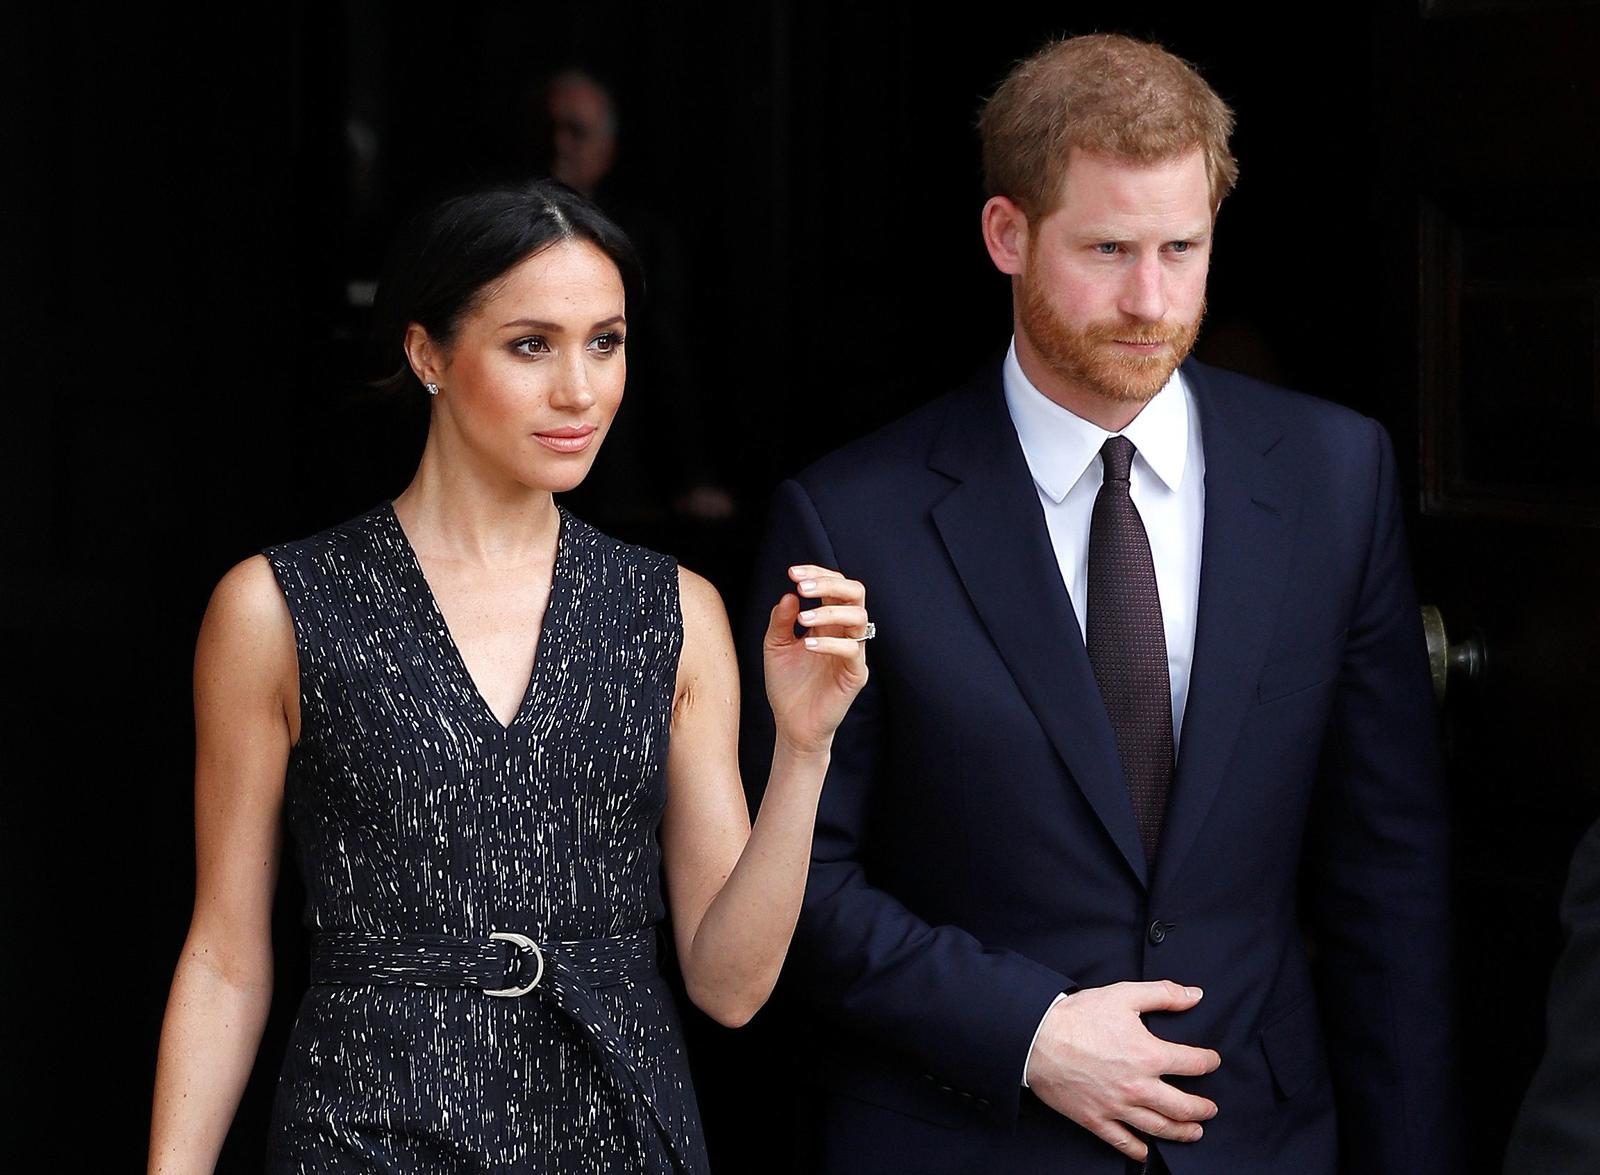 Britain’s Prince Harry and his fiancee Meghan Markle leave a service at St Martin-in-The Fields to mark 25 years since Stephen Lawrence was killed in a racially motivated attack, in London